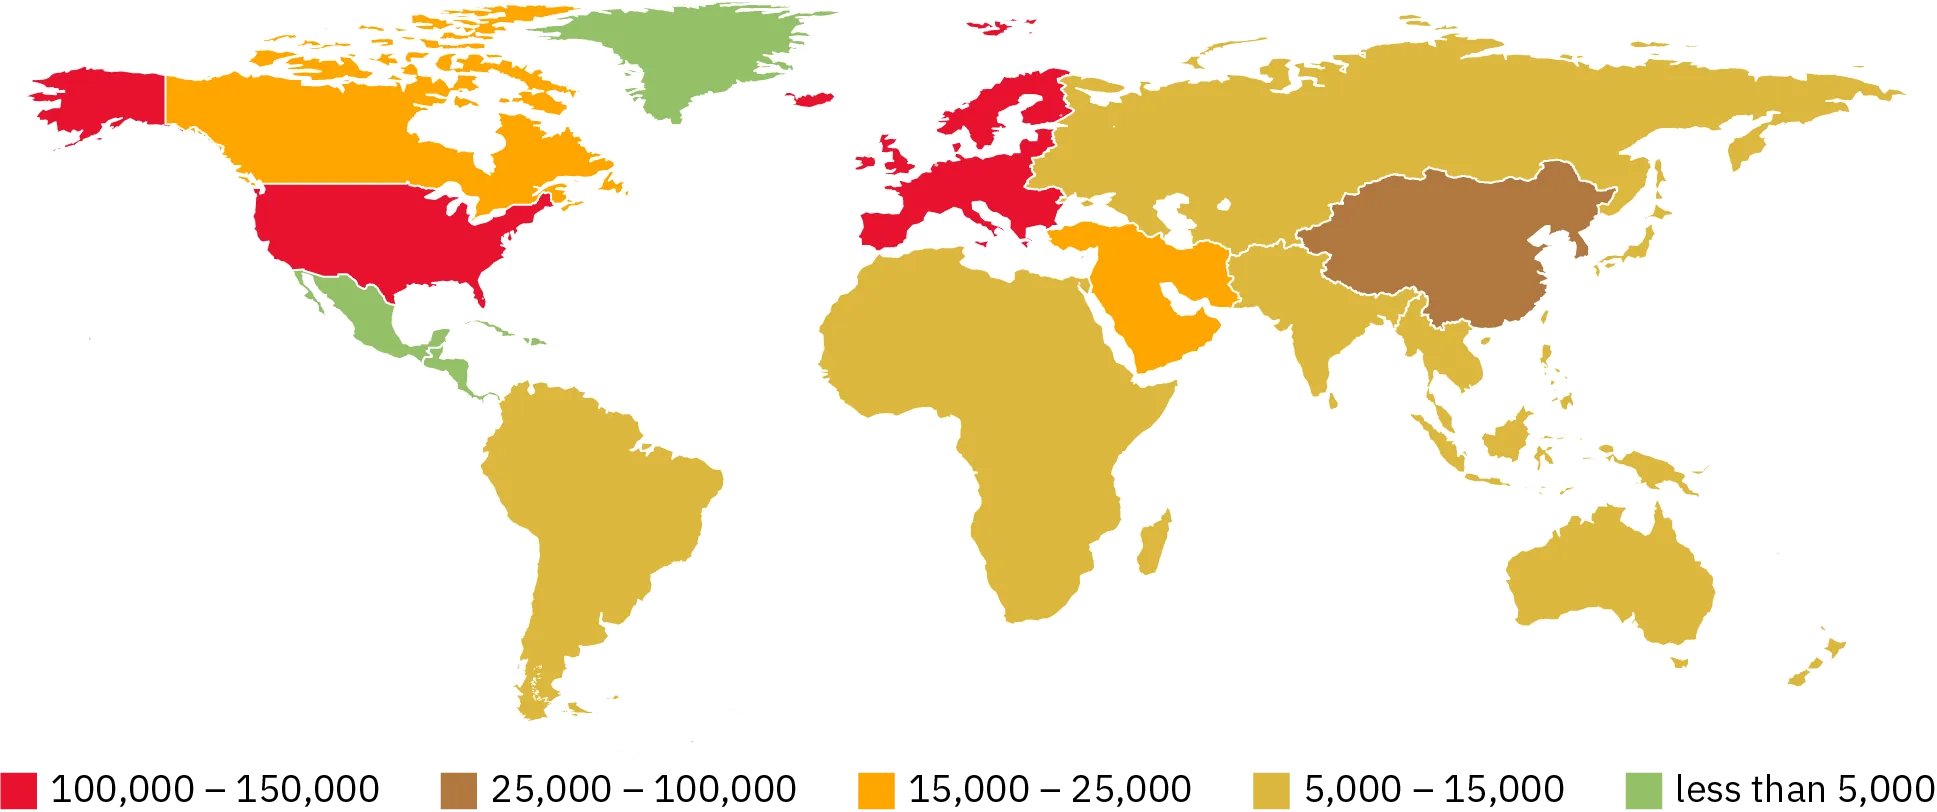 A map with shading to indicate the number of ongoing clinical trials in various regions. The following regions have 100,000 - 150,000: the United States, Western Europe. The following region has 25,000 - 100,000: China. The following regions have 15,000 - 25,000: Canada, the Middle East. The following regions have 5,000 - 15,000: South America, Africa, Russia, Eastern Europe, Southeast Asia, Australia. The following regions have less than 5,000: Mexico, Central America, Greenland.